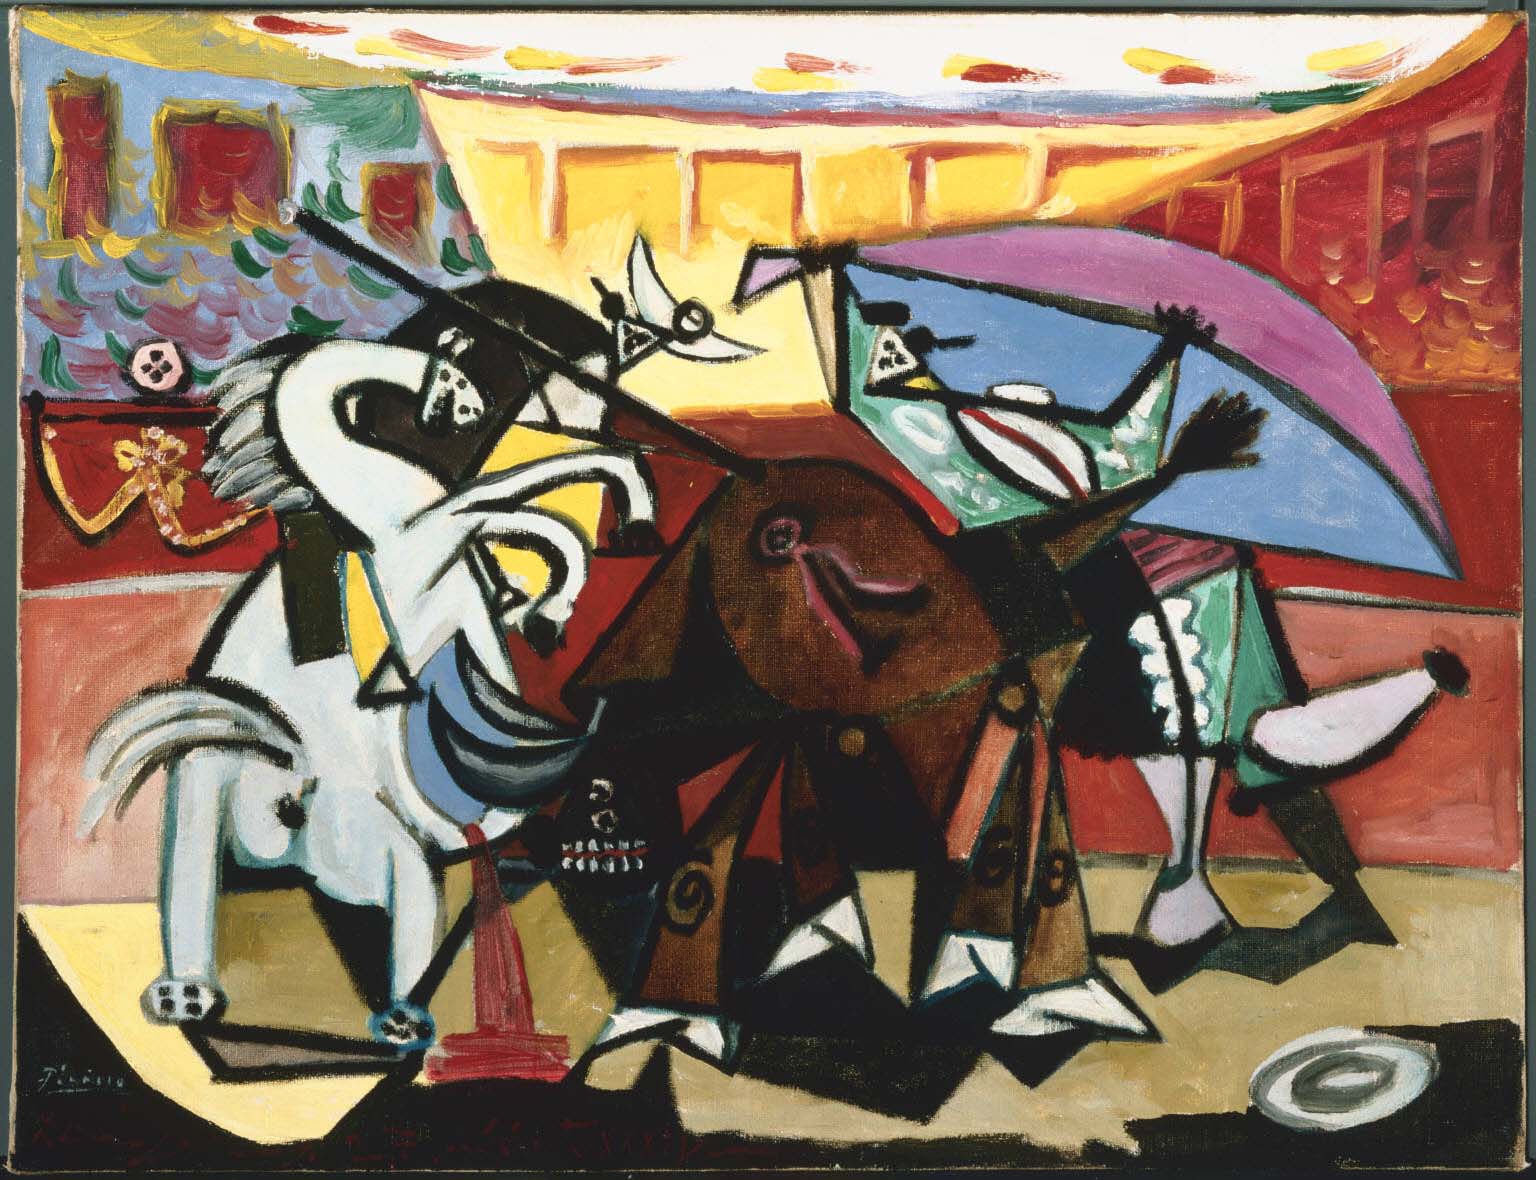 The Bull by Pablo Picasso - A Lesson in Abstraction - Draw Paint Academy